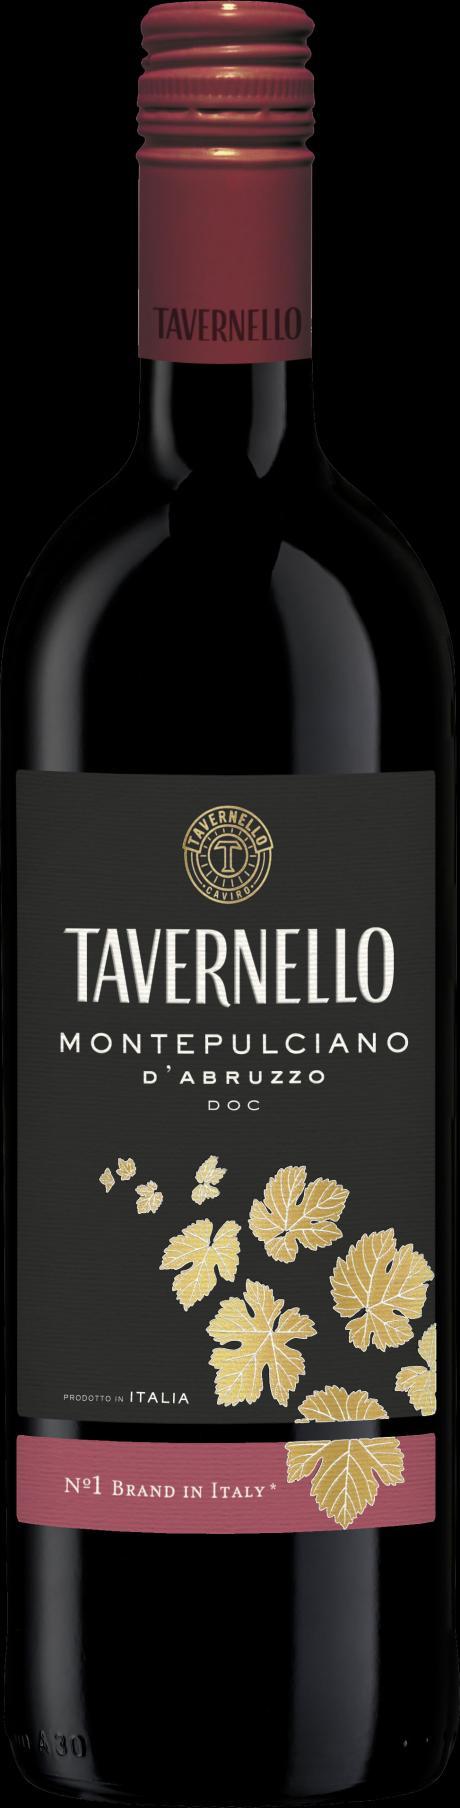 Abruzzo Abruzzo tumbles down from the Apennine mountains to span an impressive portion of the